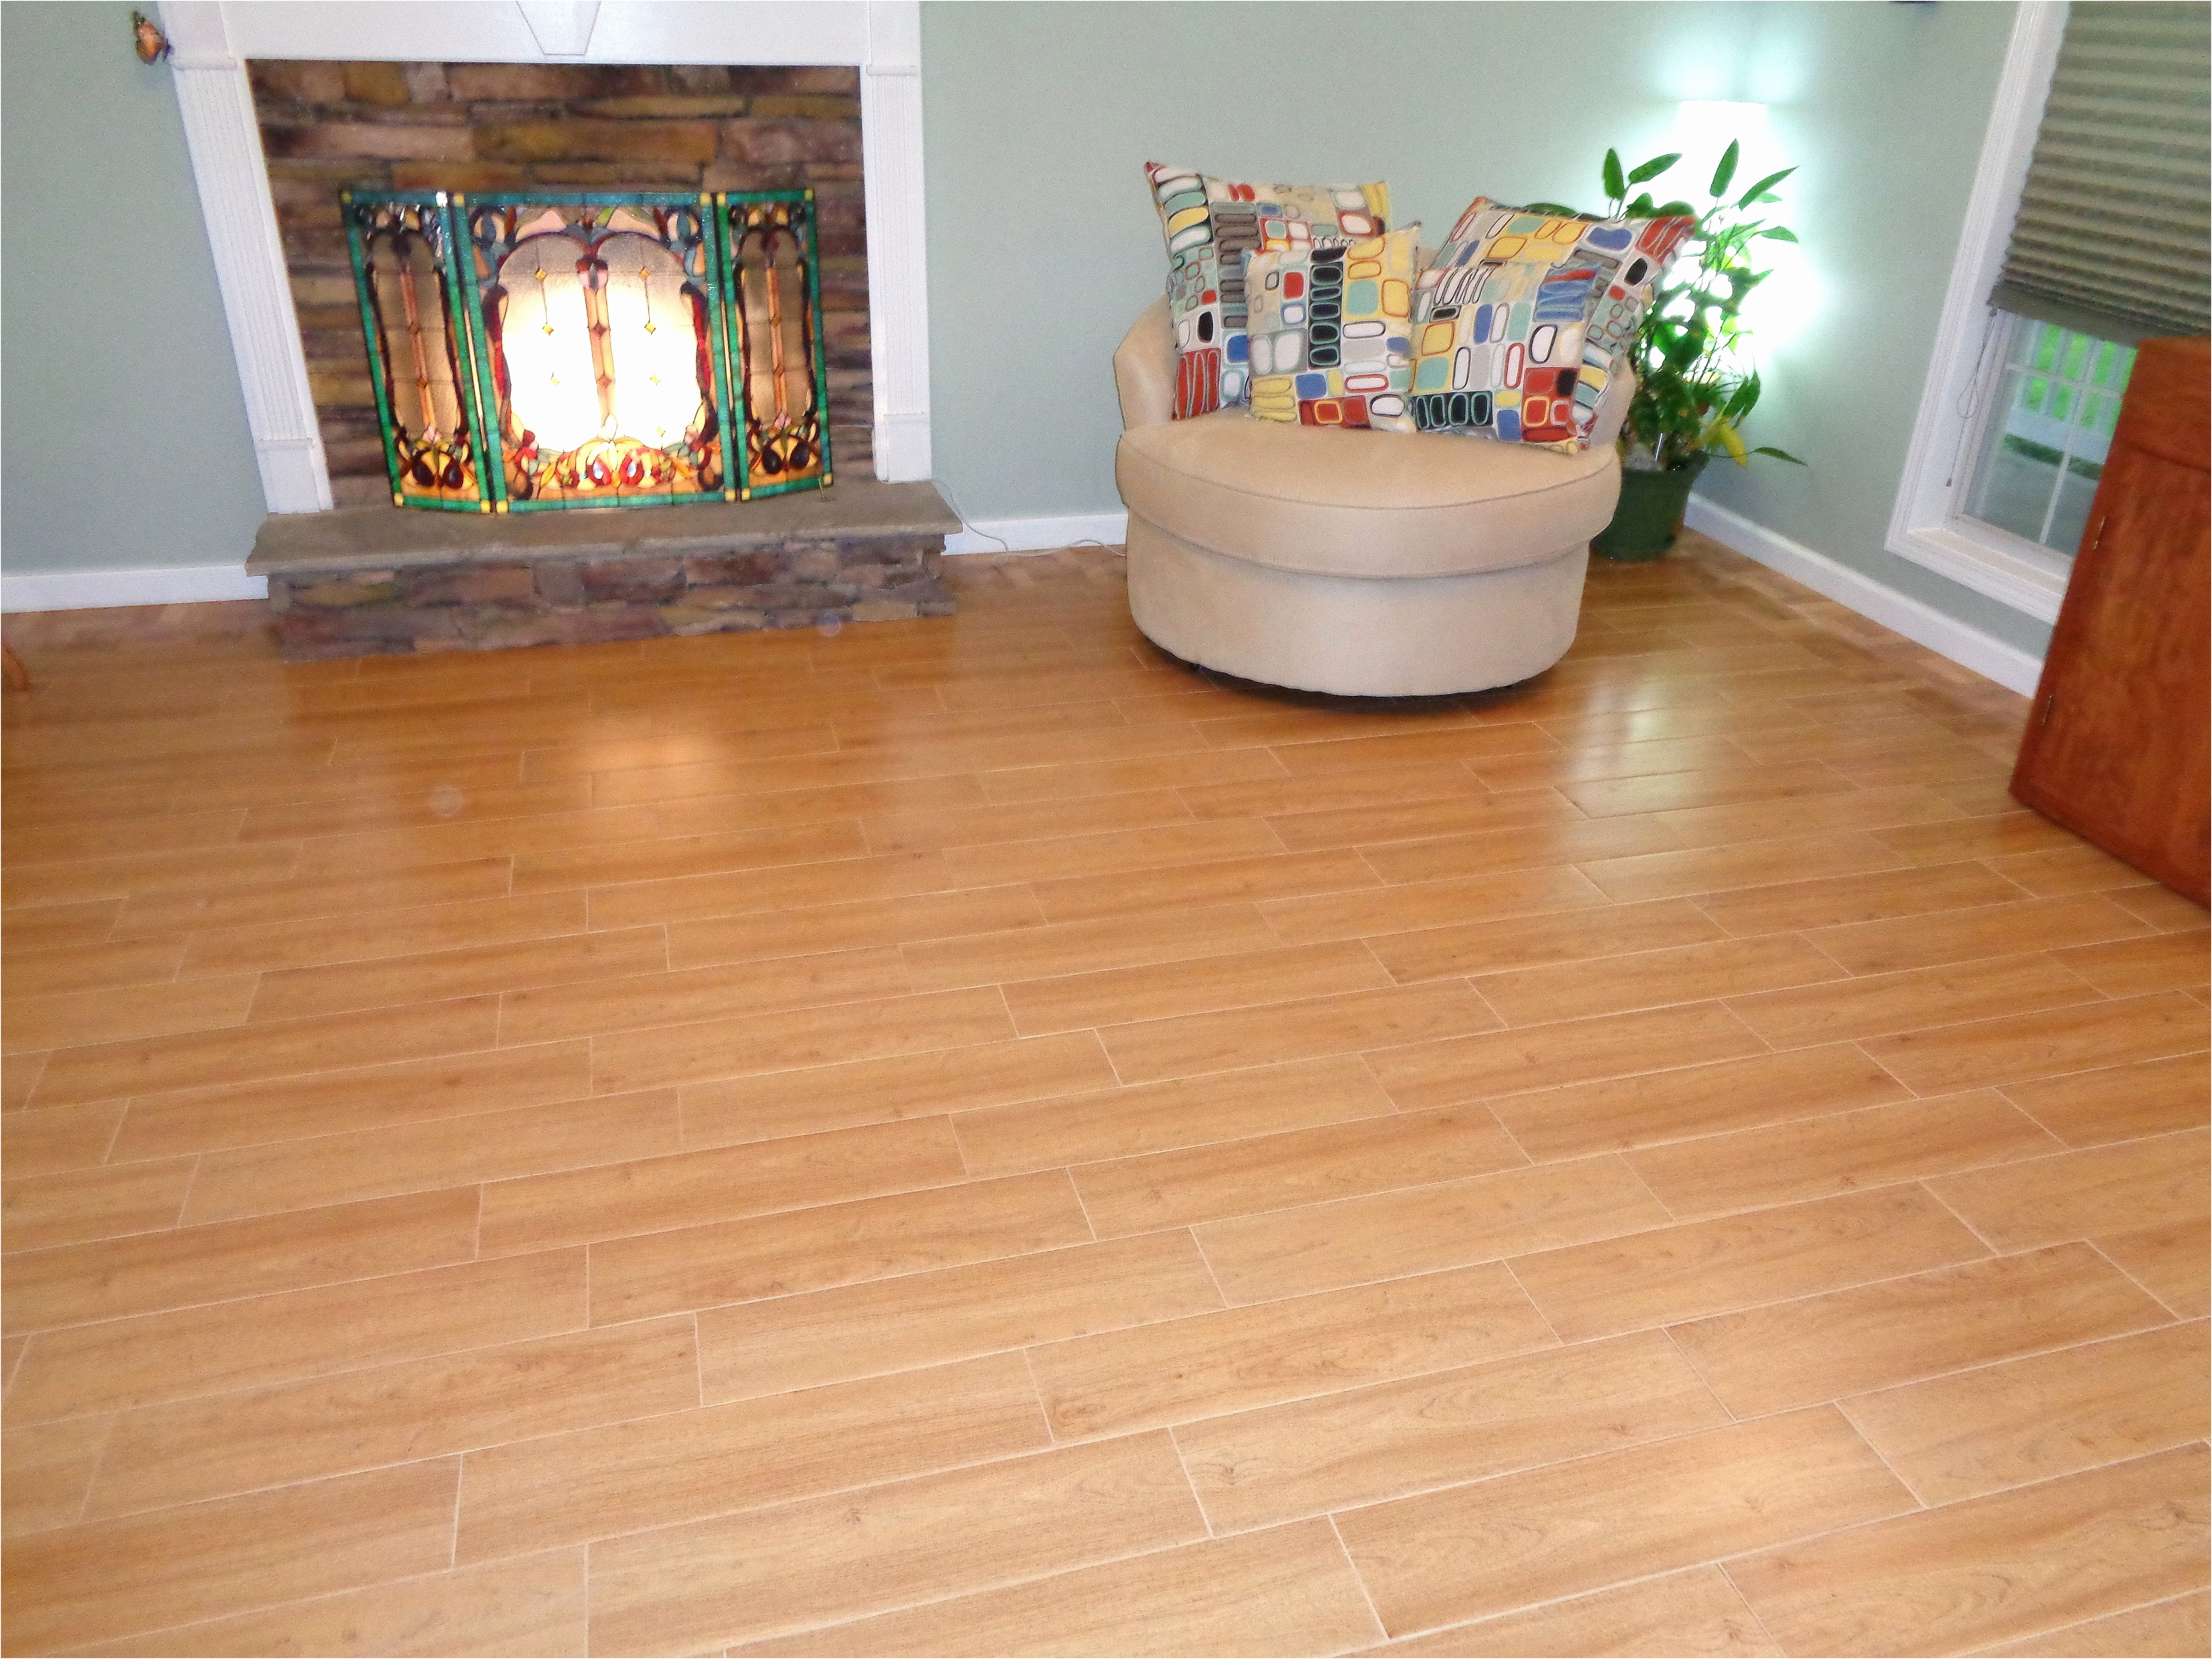 2 oak hardwood flooring of wholesale wood flooring sandblasted 2 x 4 and brick floor awesome with laminate wood flooring sale laminate wood flooring sale best clearance flooring 0d unique